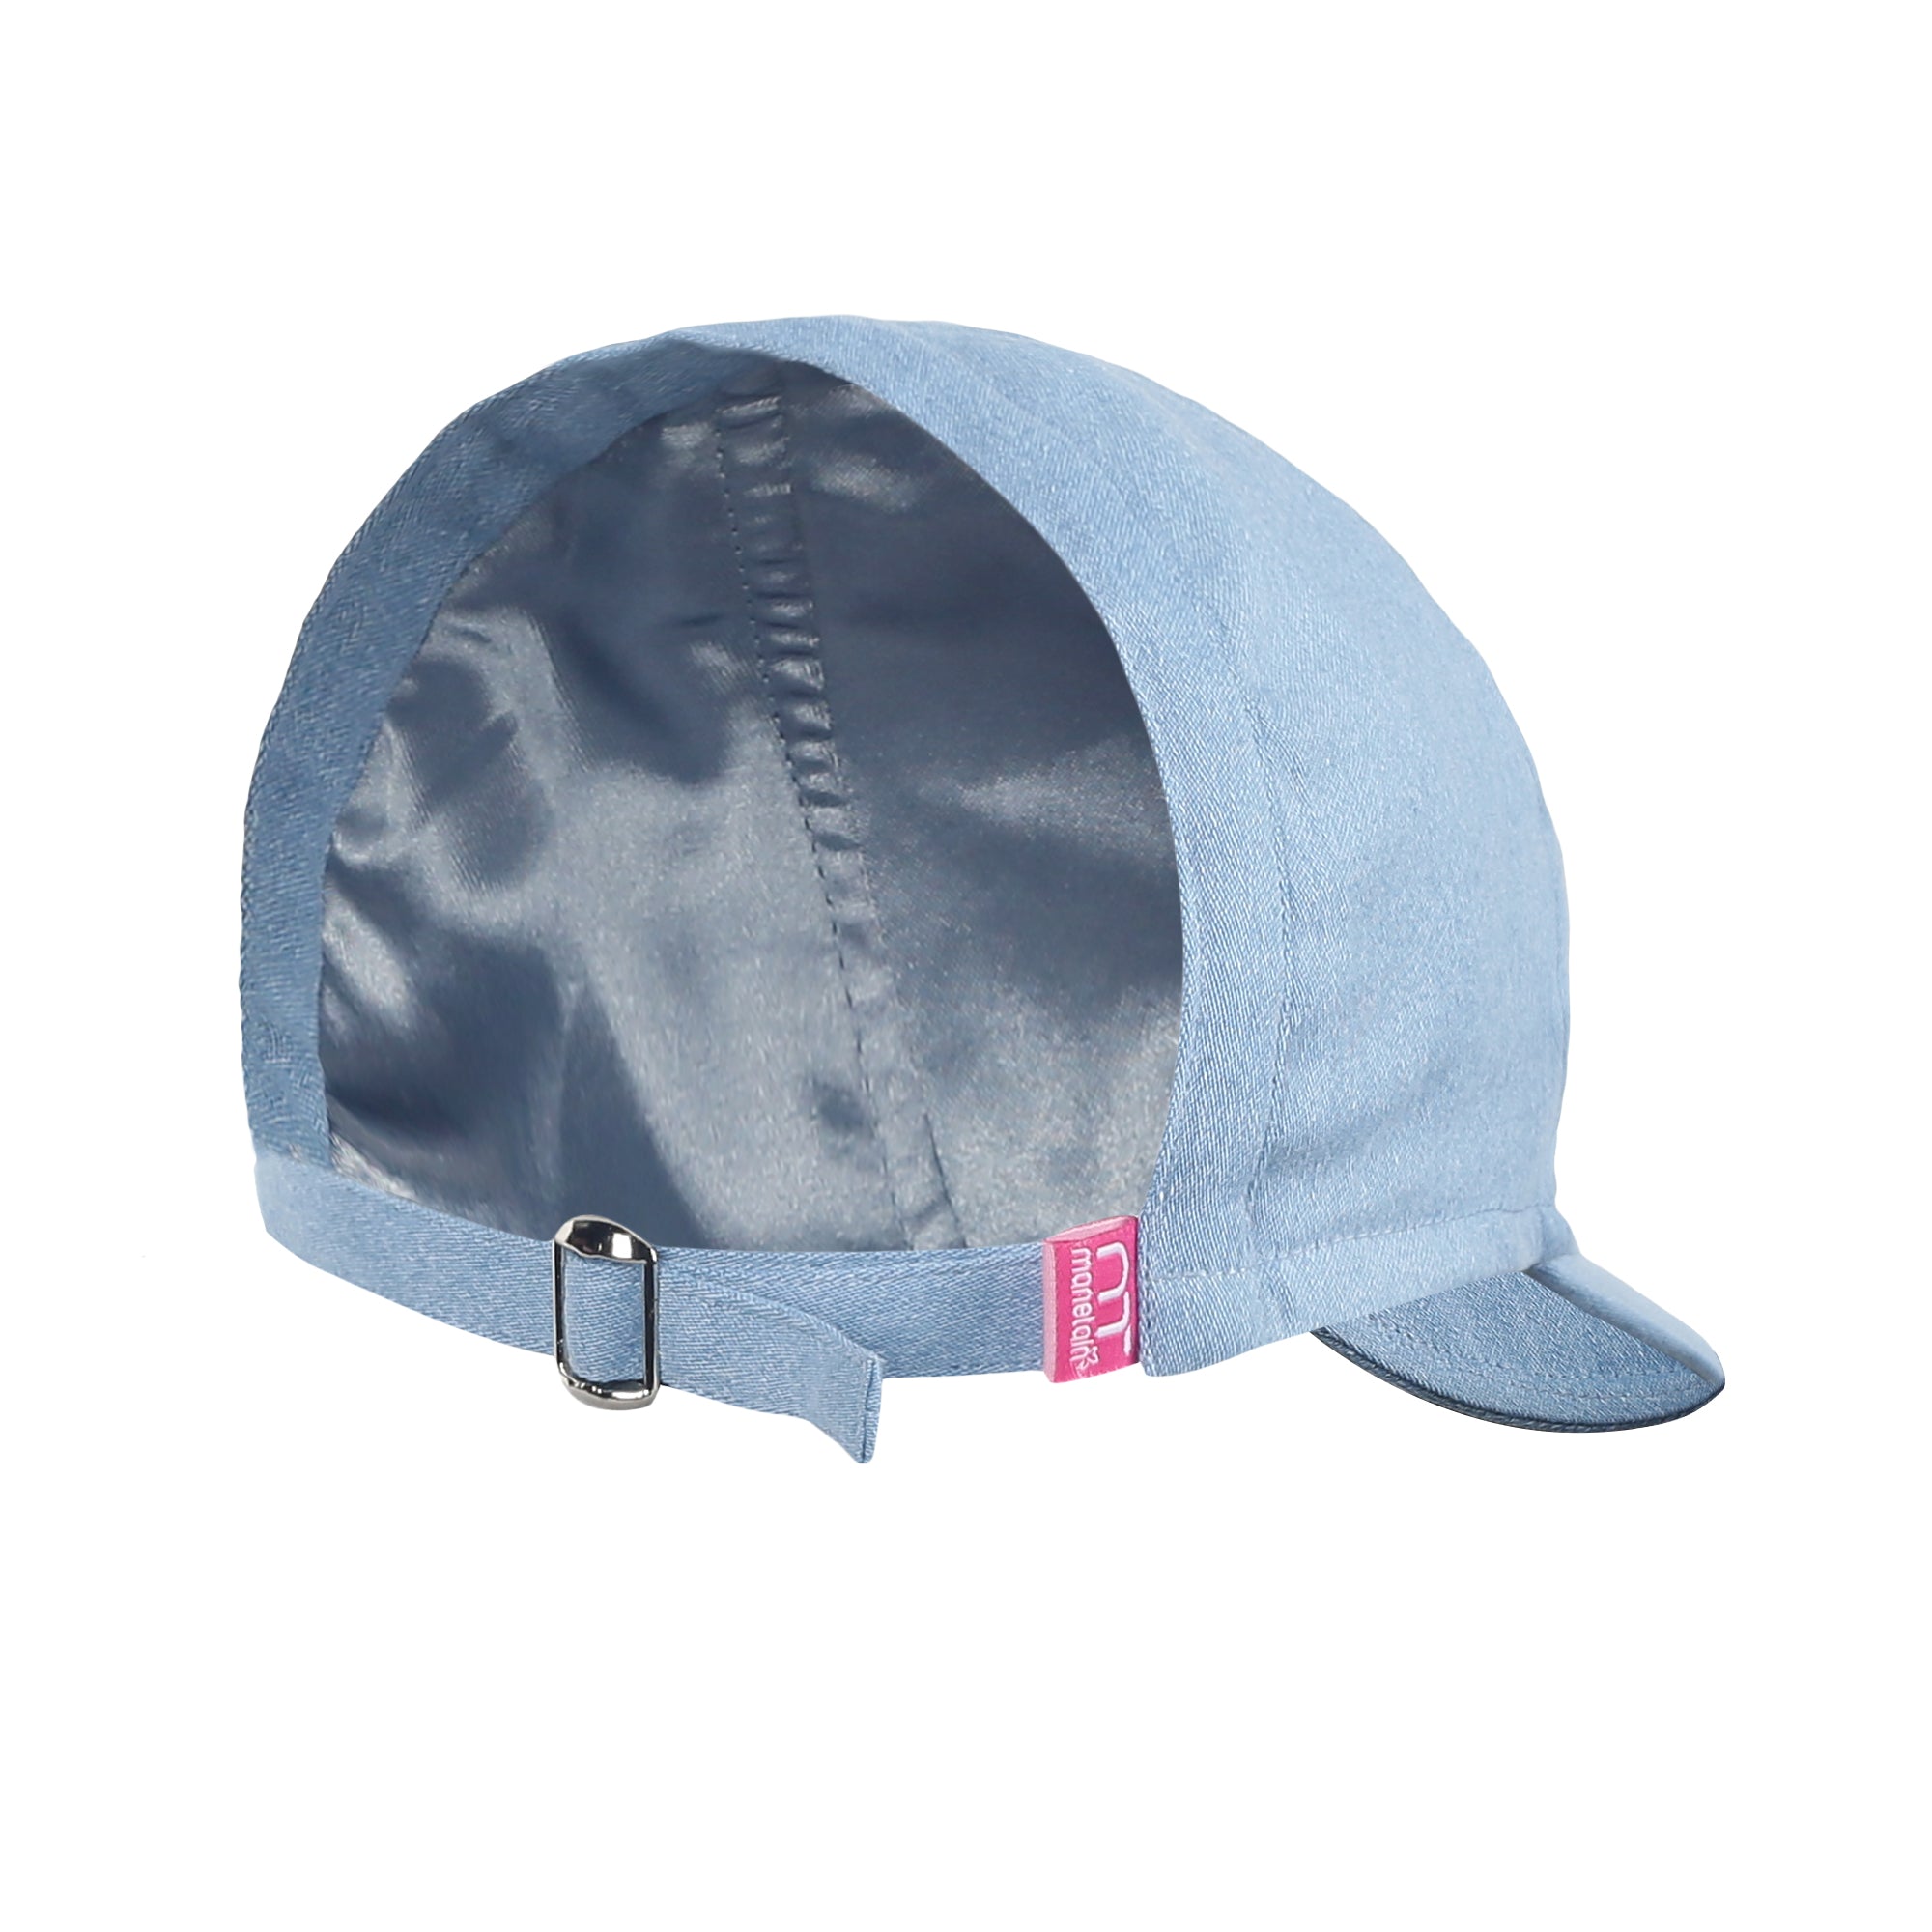 Satin lined cap - Manetain Store